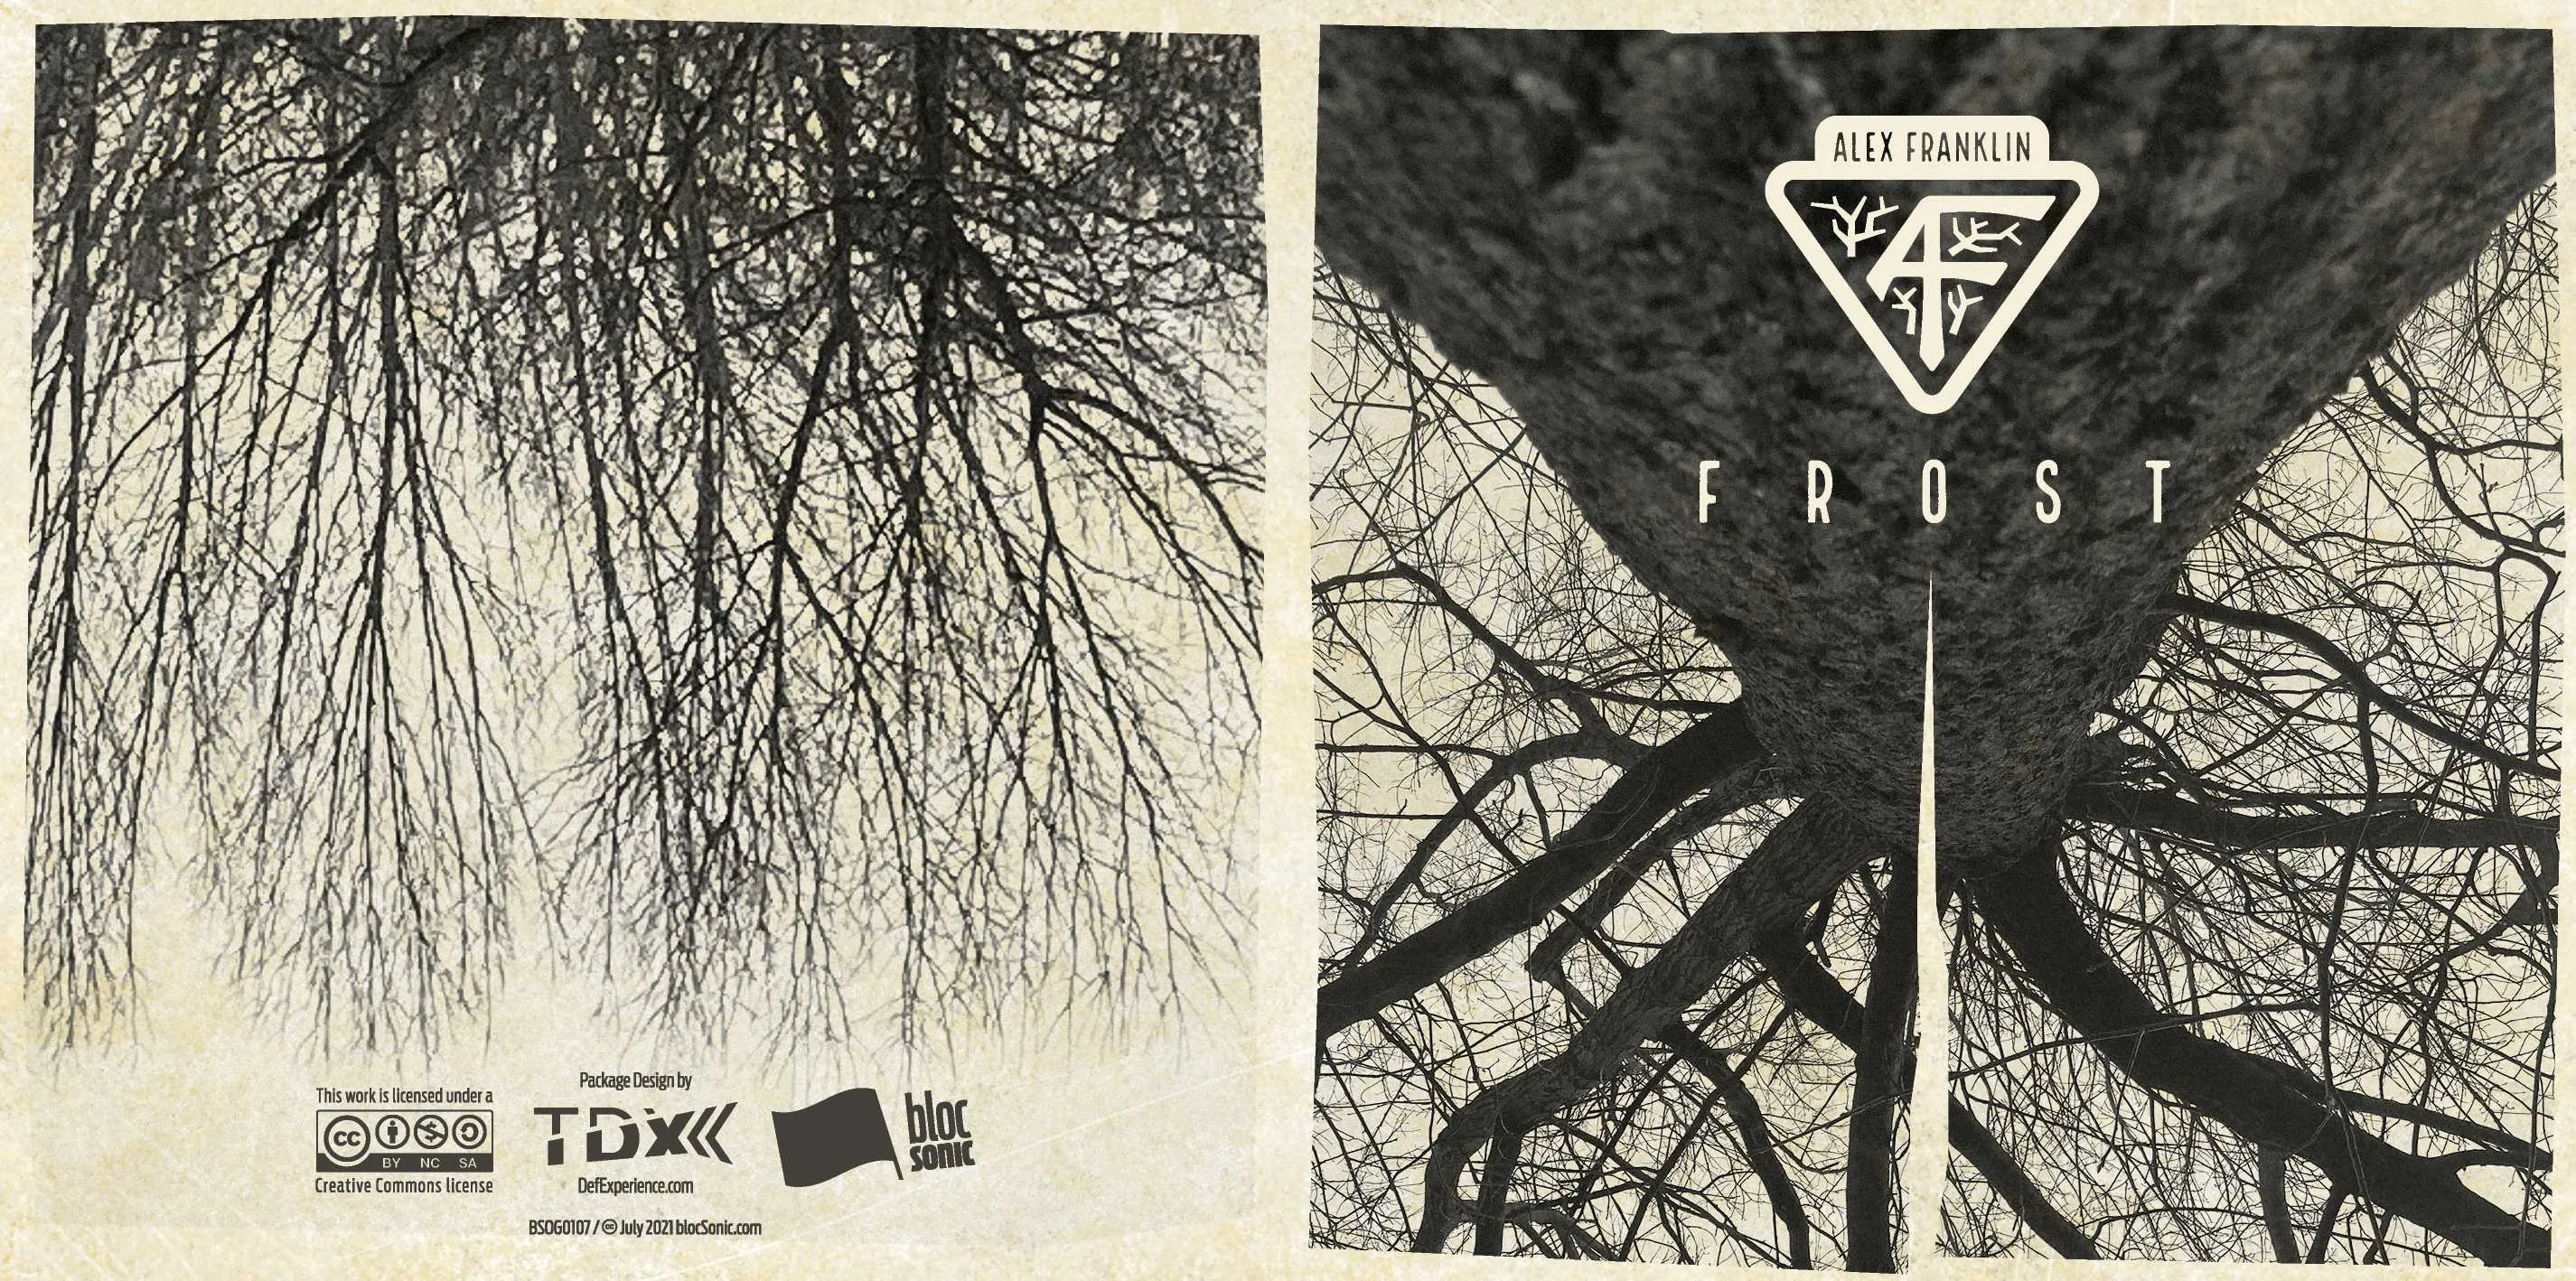 Album insert for “FROST” by Alex Franklin